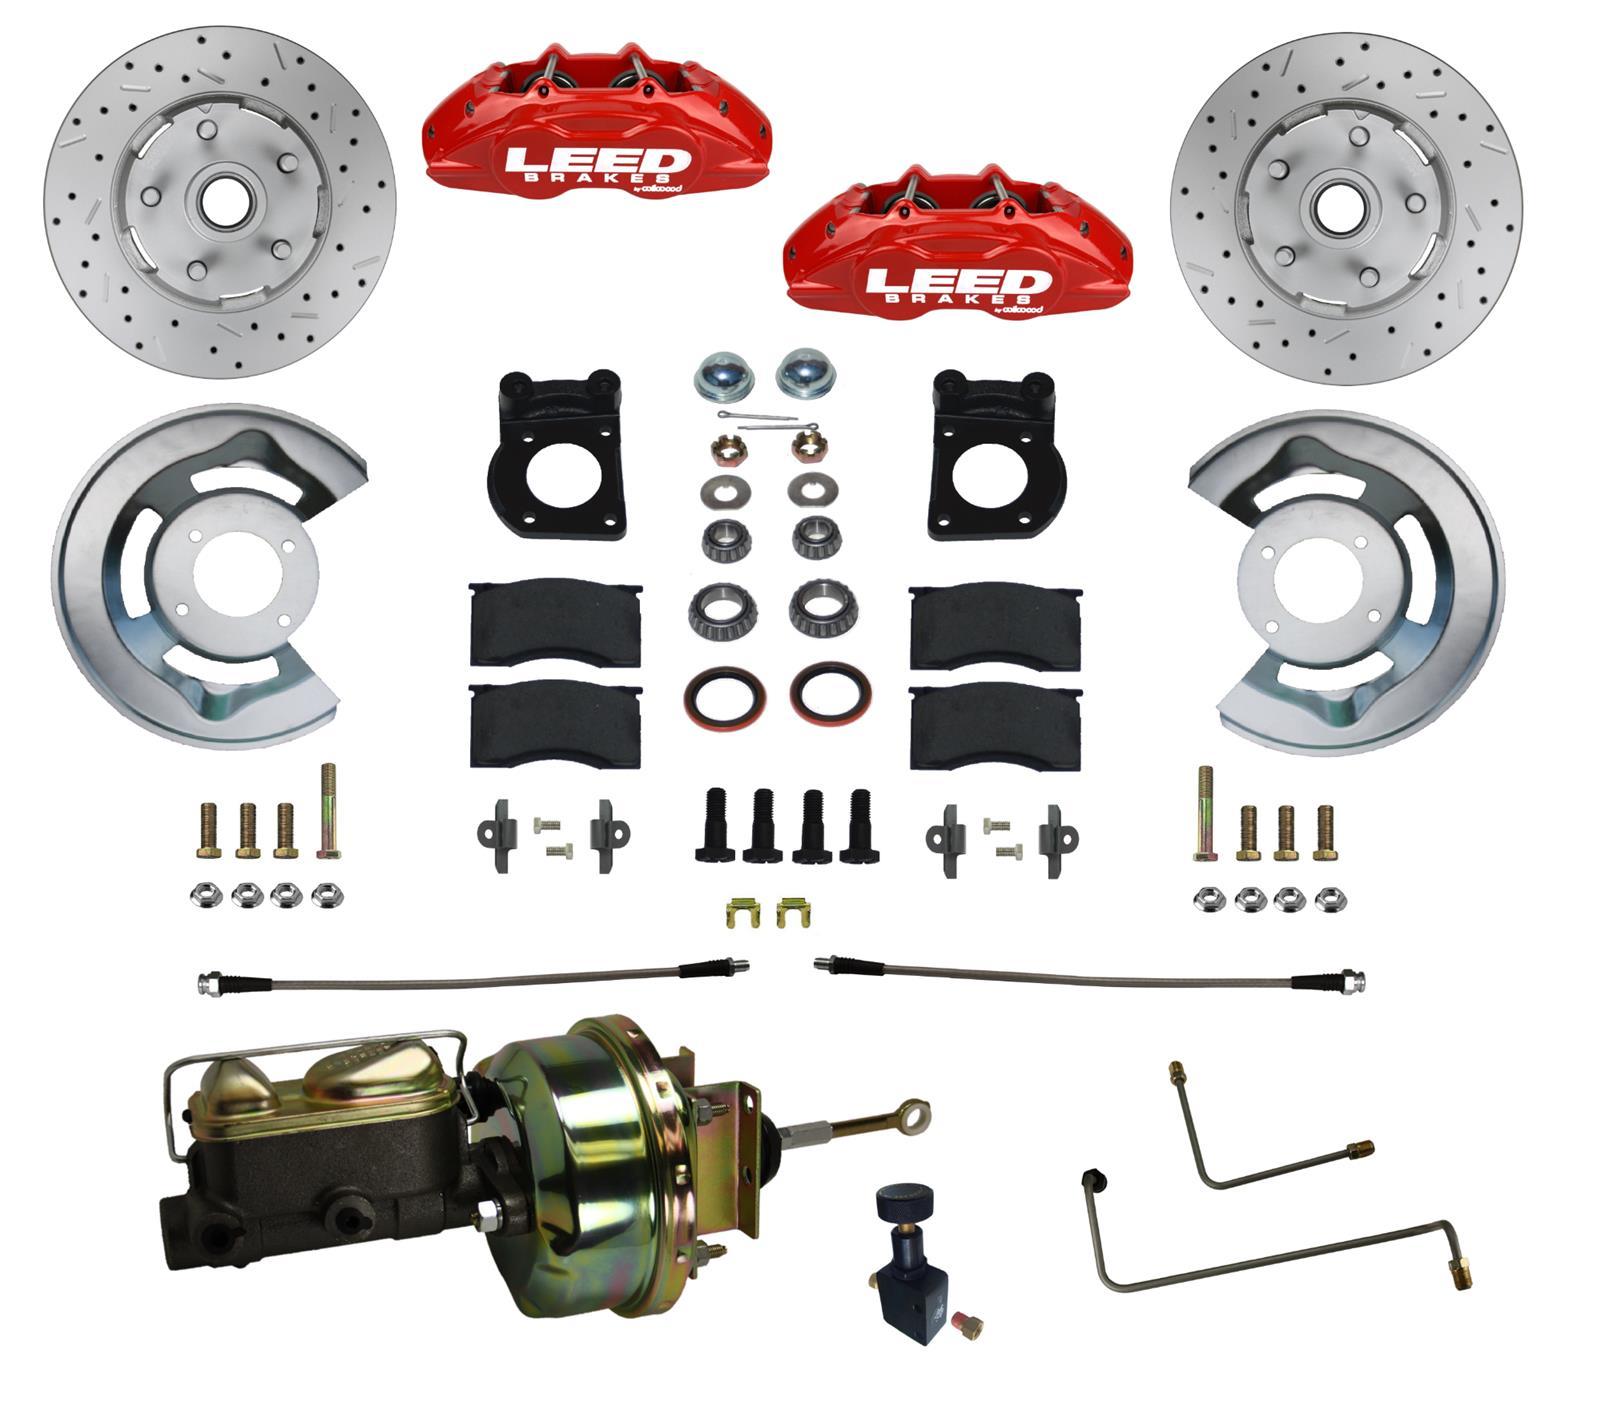 Leed Brakes RFC0005-H405AX Brake System, MaxGrip Lite, Front, 4 Piston Caliper, 11.33 in Drilled / Slotted Rotor, Pads / Calipers / Dust Cap / Backing Plates / Master Cylinder / Brake Booster / Proportioning Valve, Aluminum, Red Powder Coat, Ford Mustang 